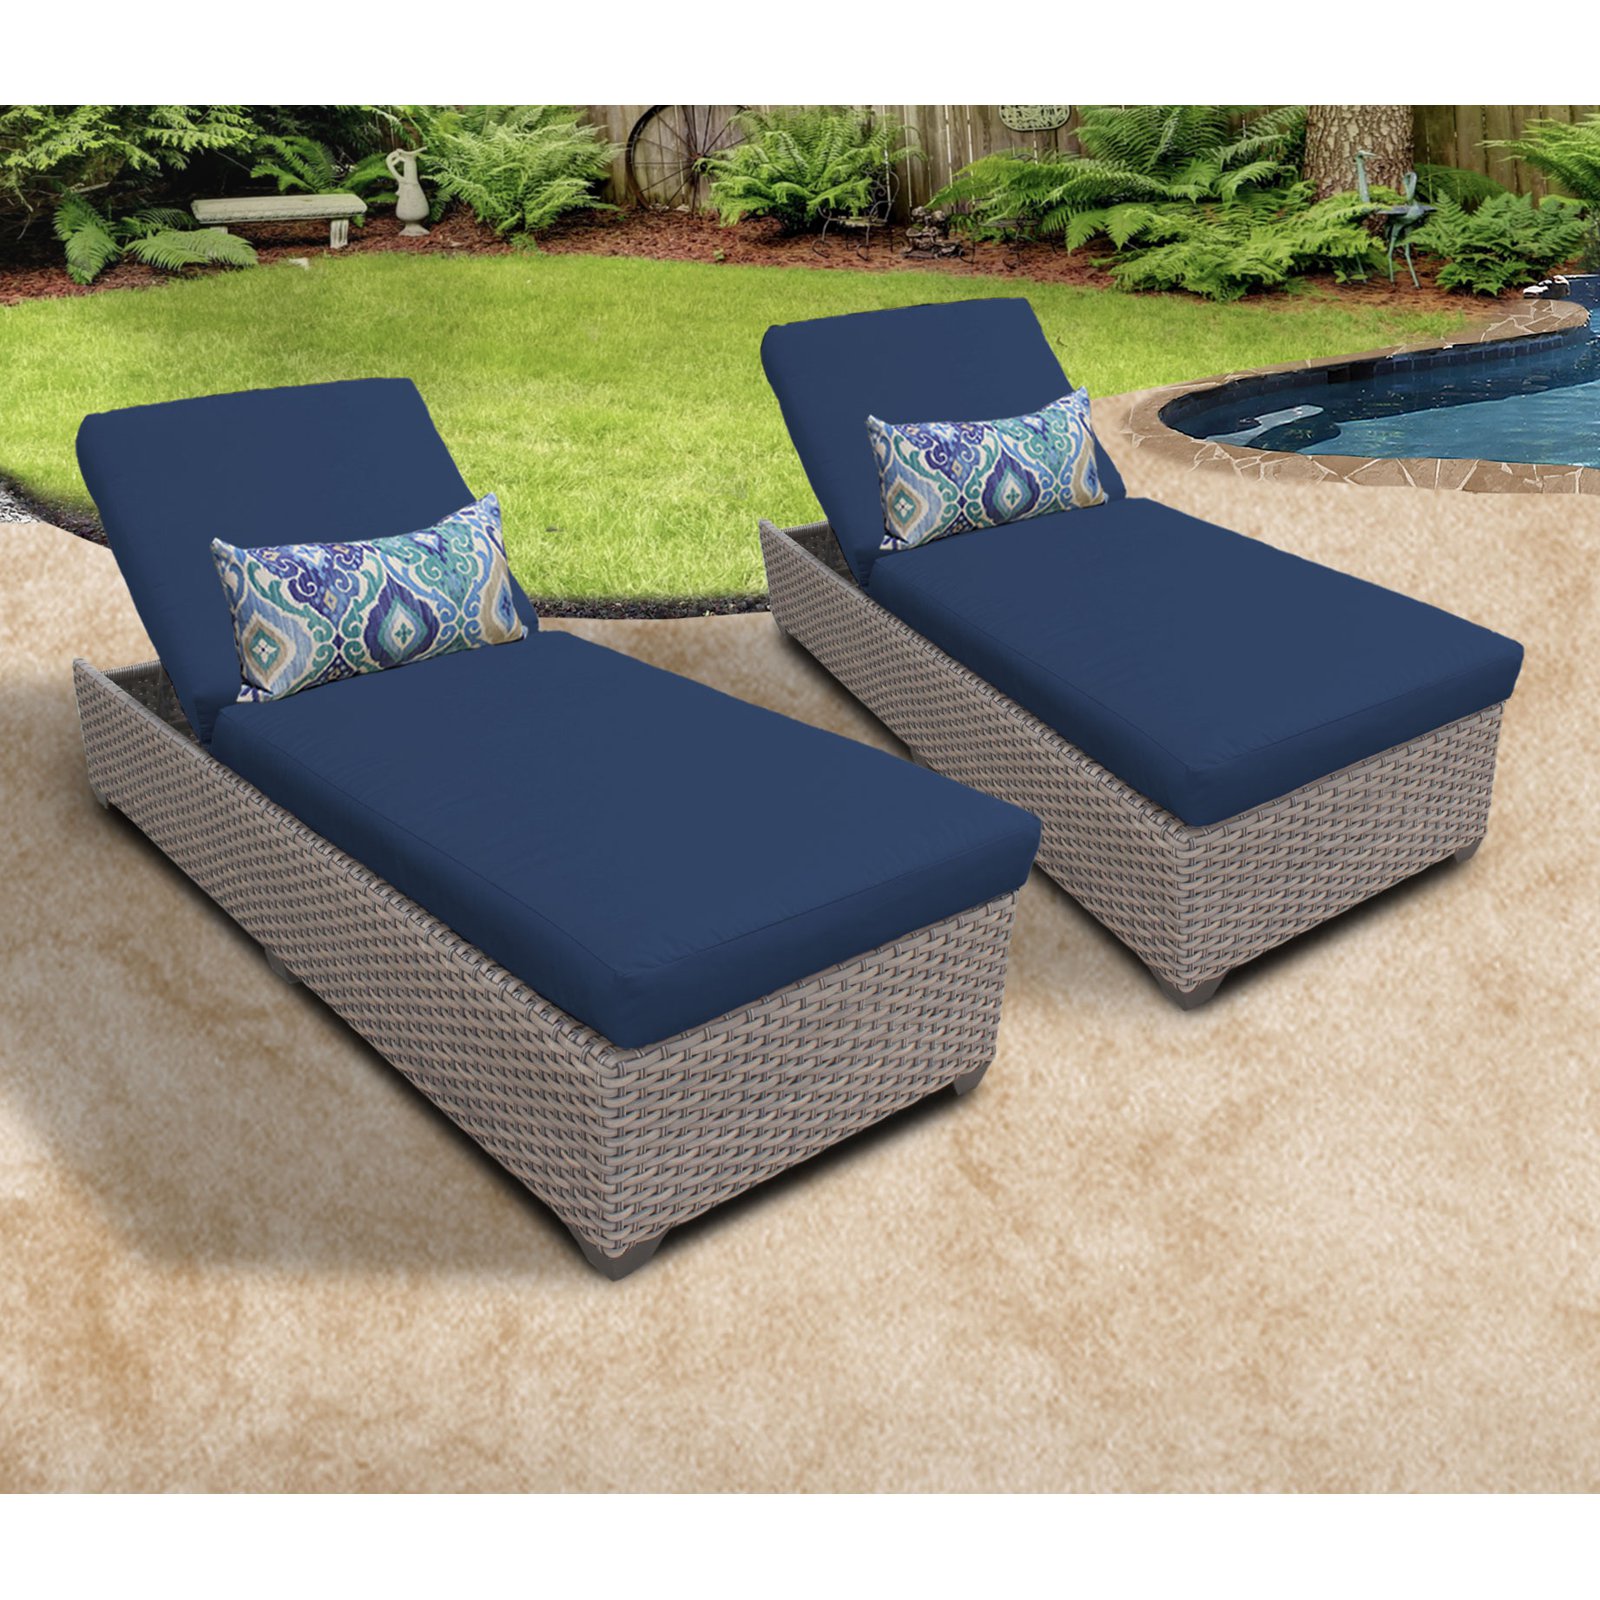 Monterey Patio Furniture Wicker Chaise Lounge - image 5 of 7